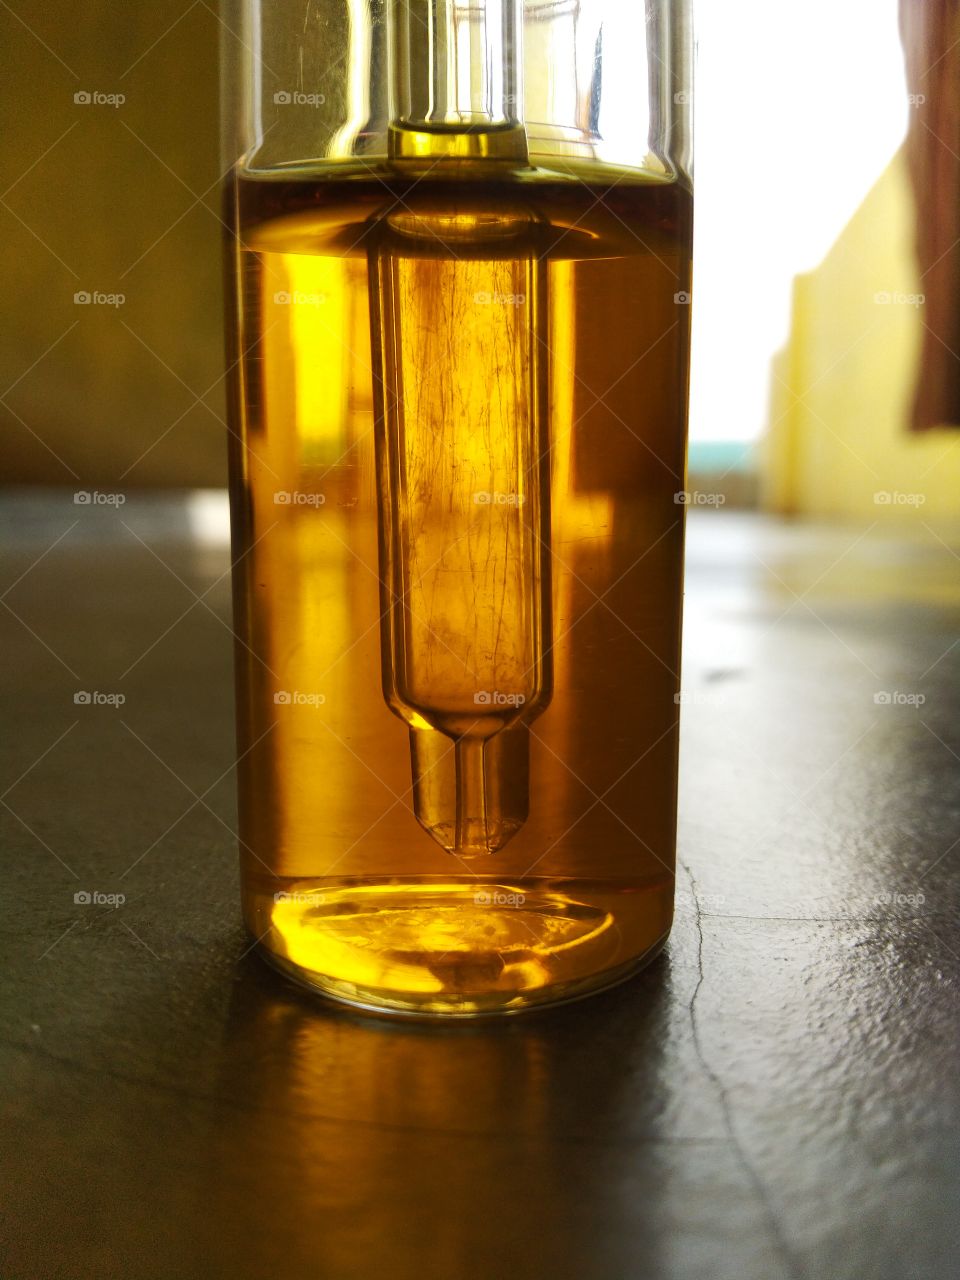 Glass bottle contains liquid chemical